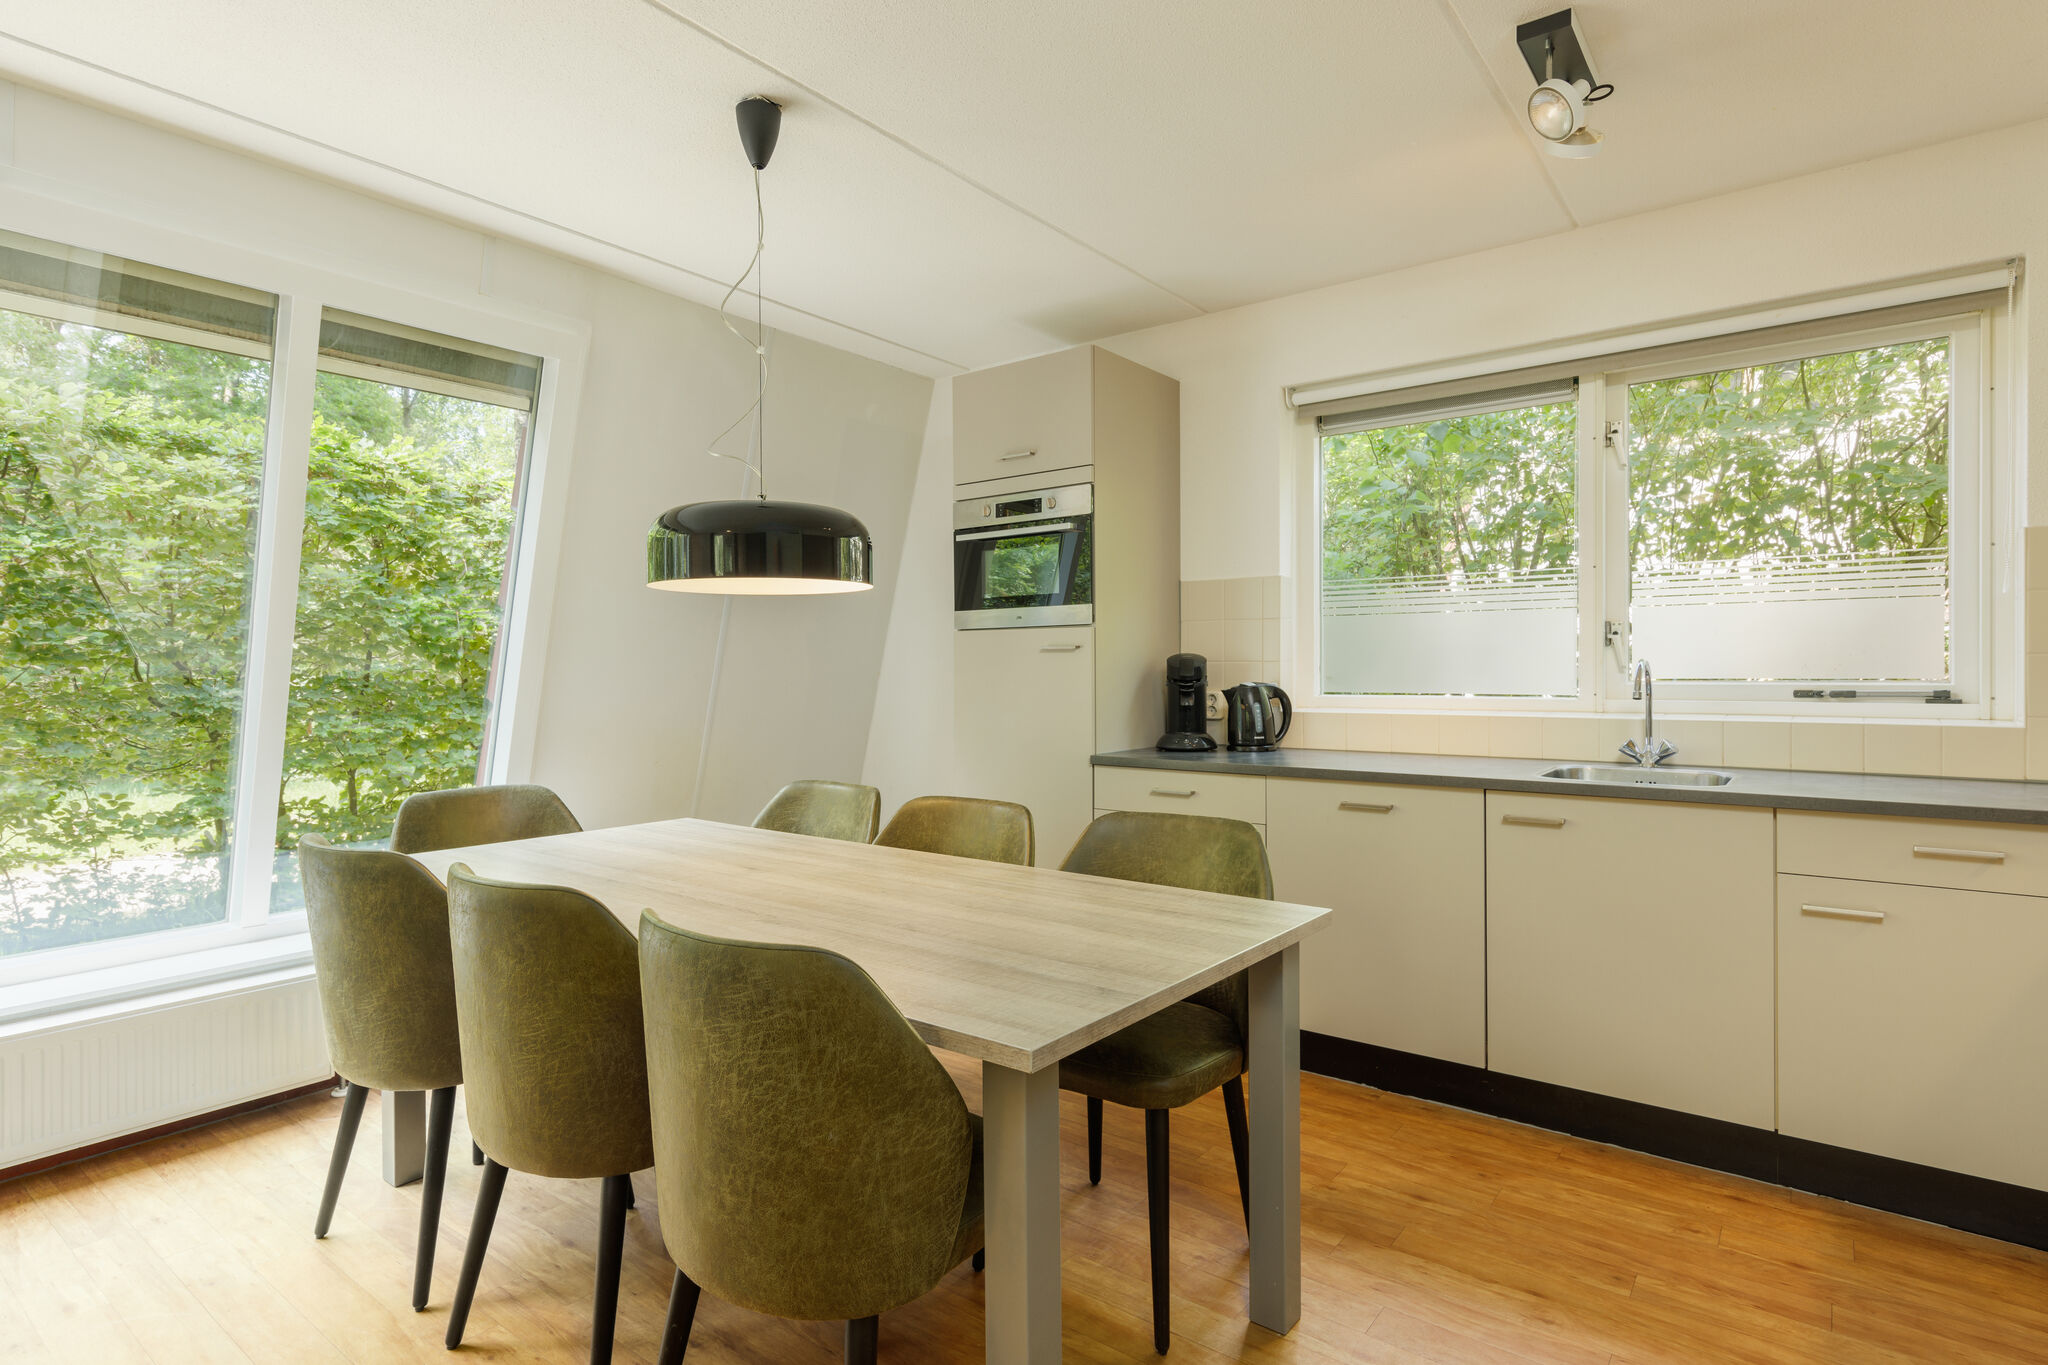 Detached forest villa with dishwasher, located in De Veluwe